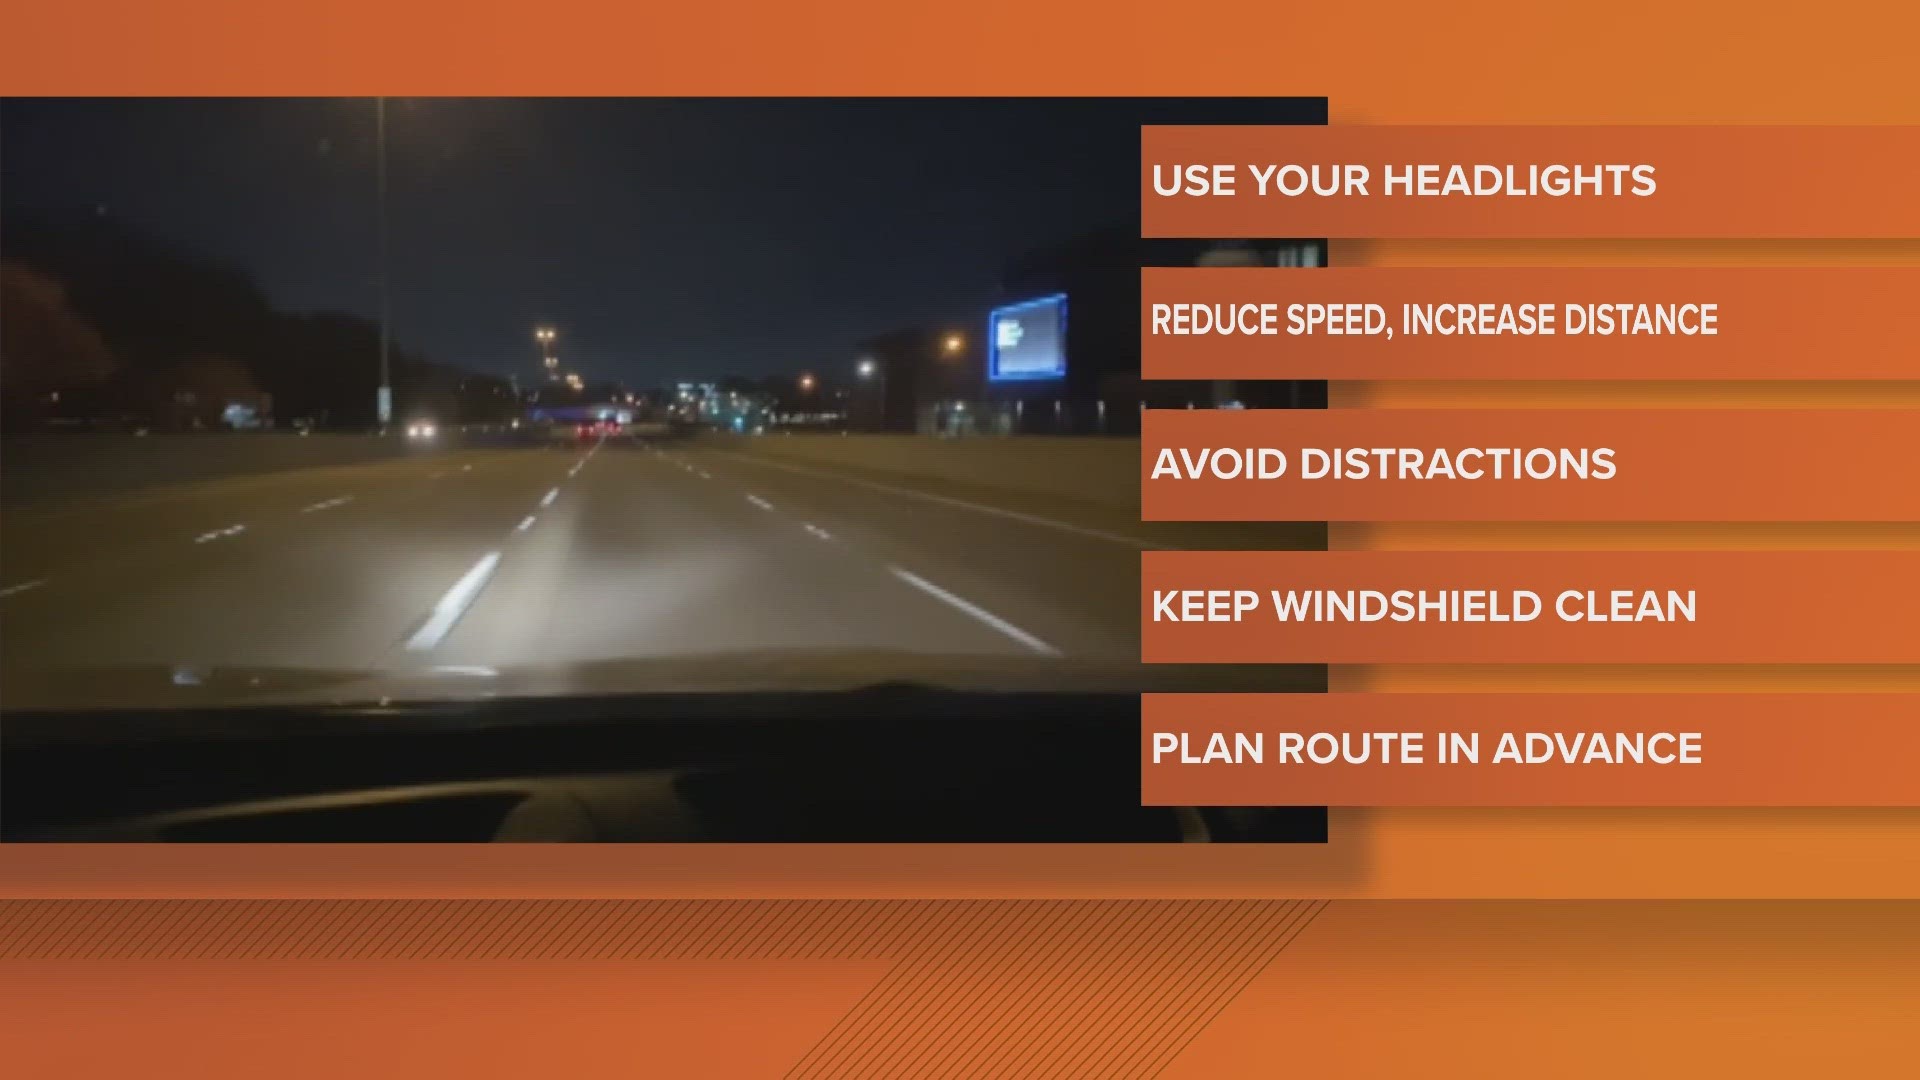 Understanding your headlights can improve your drive